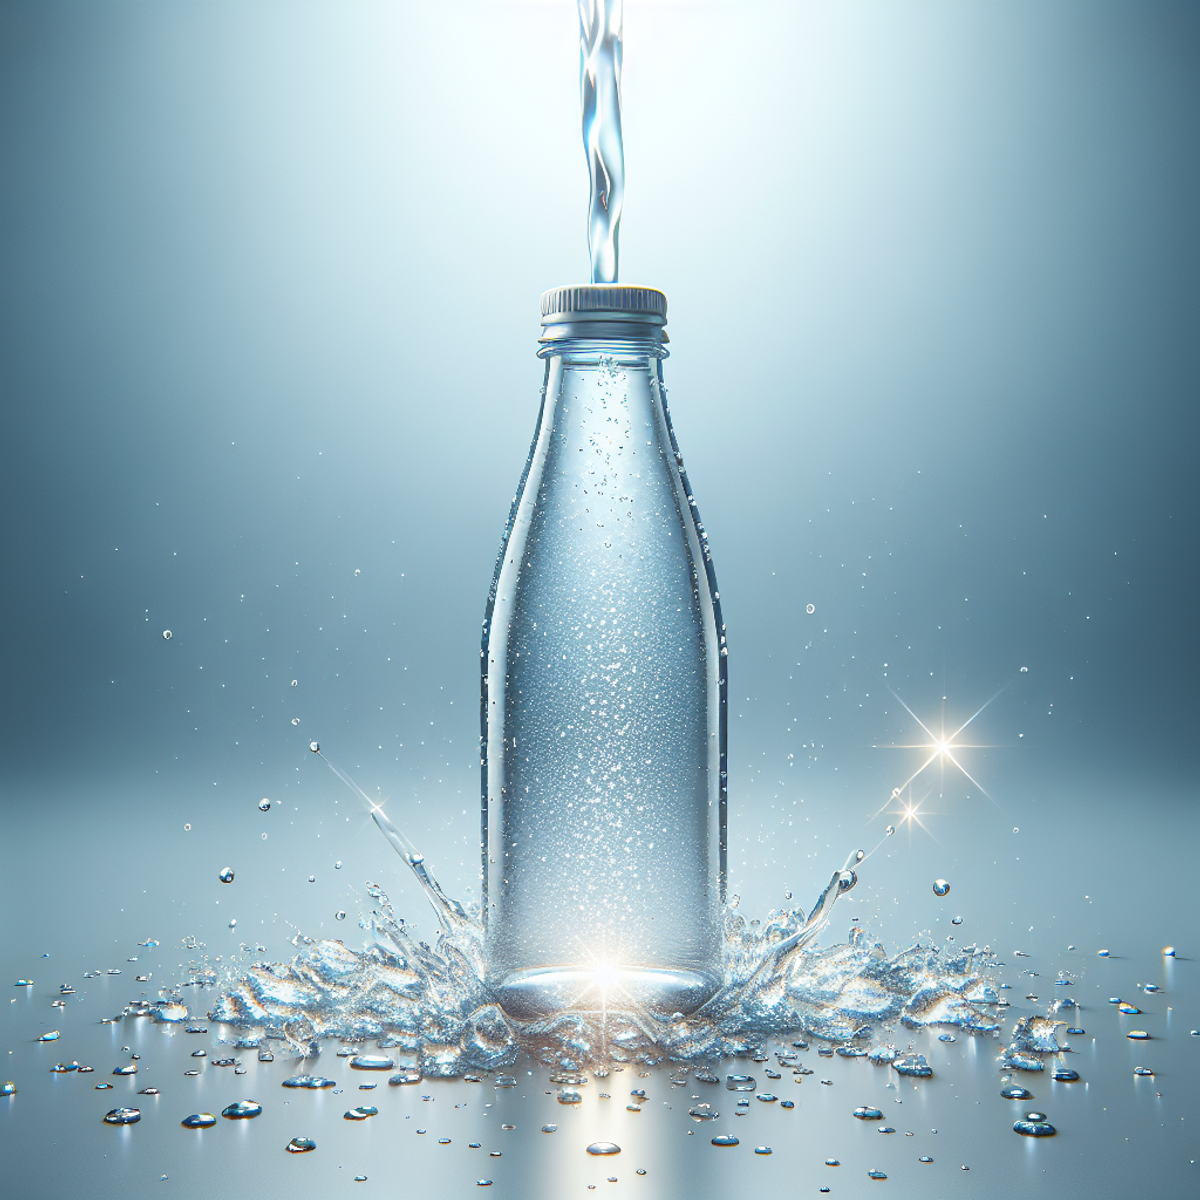 A sparkling clean glass water bottle being rinsed under a stream of water.